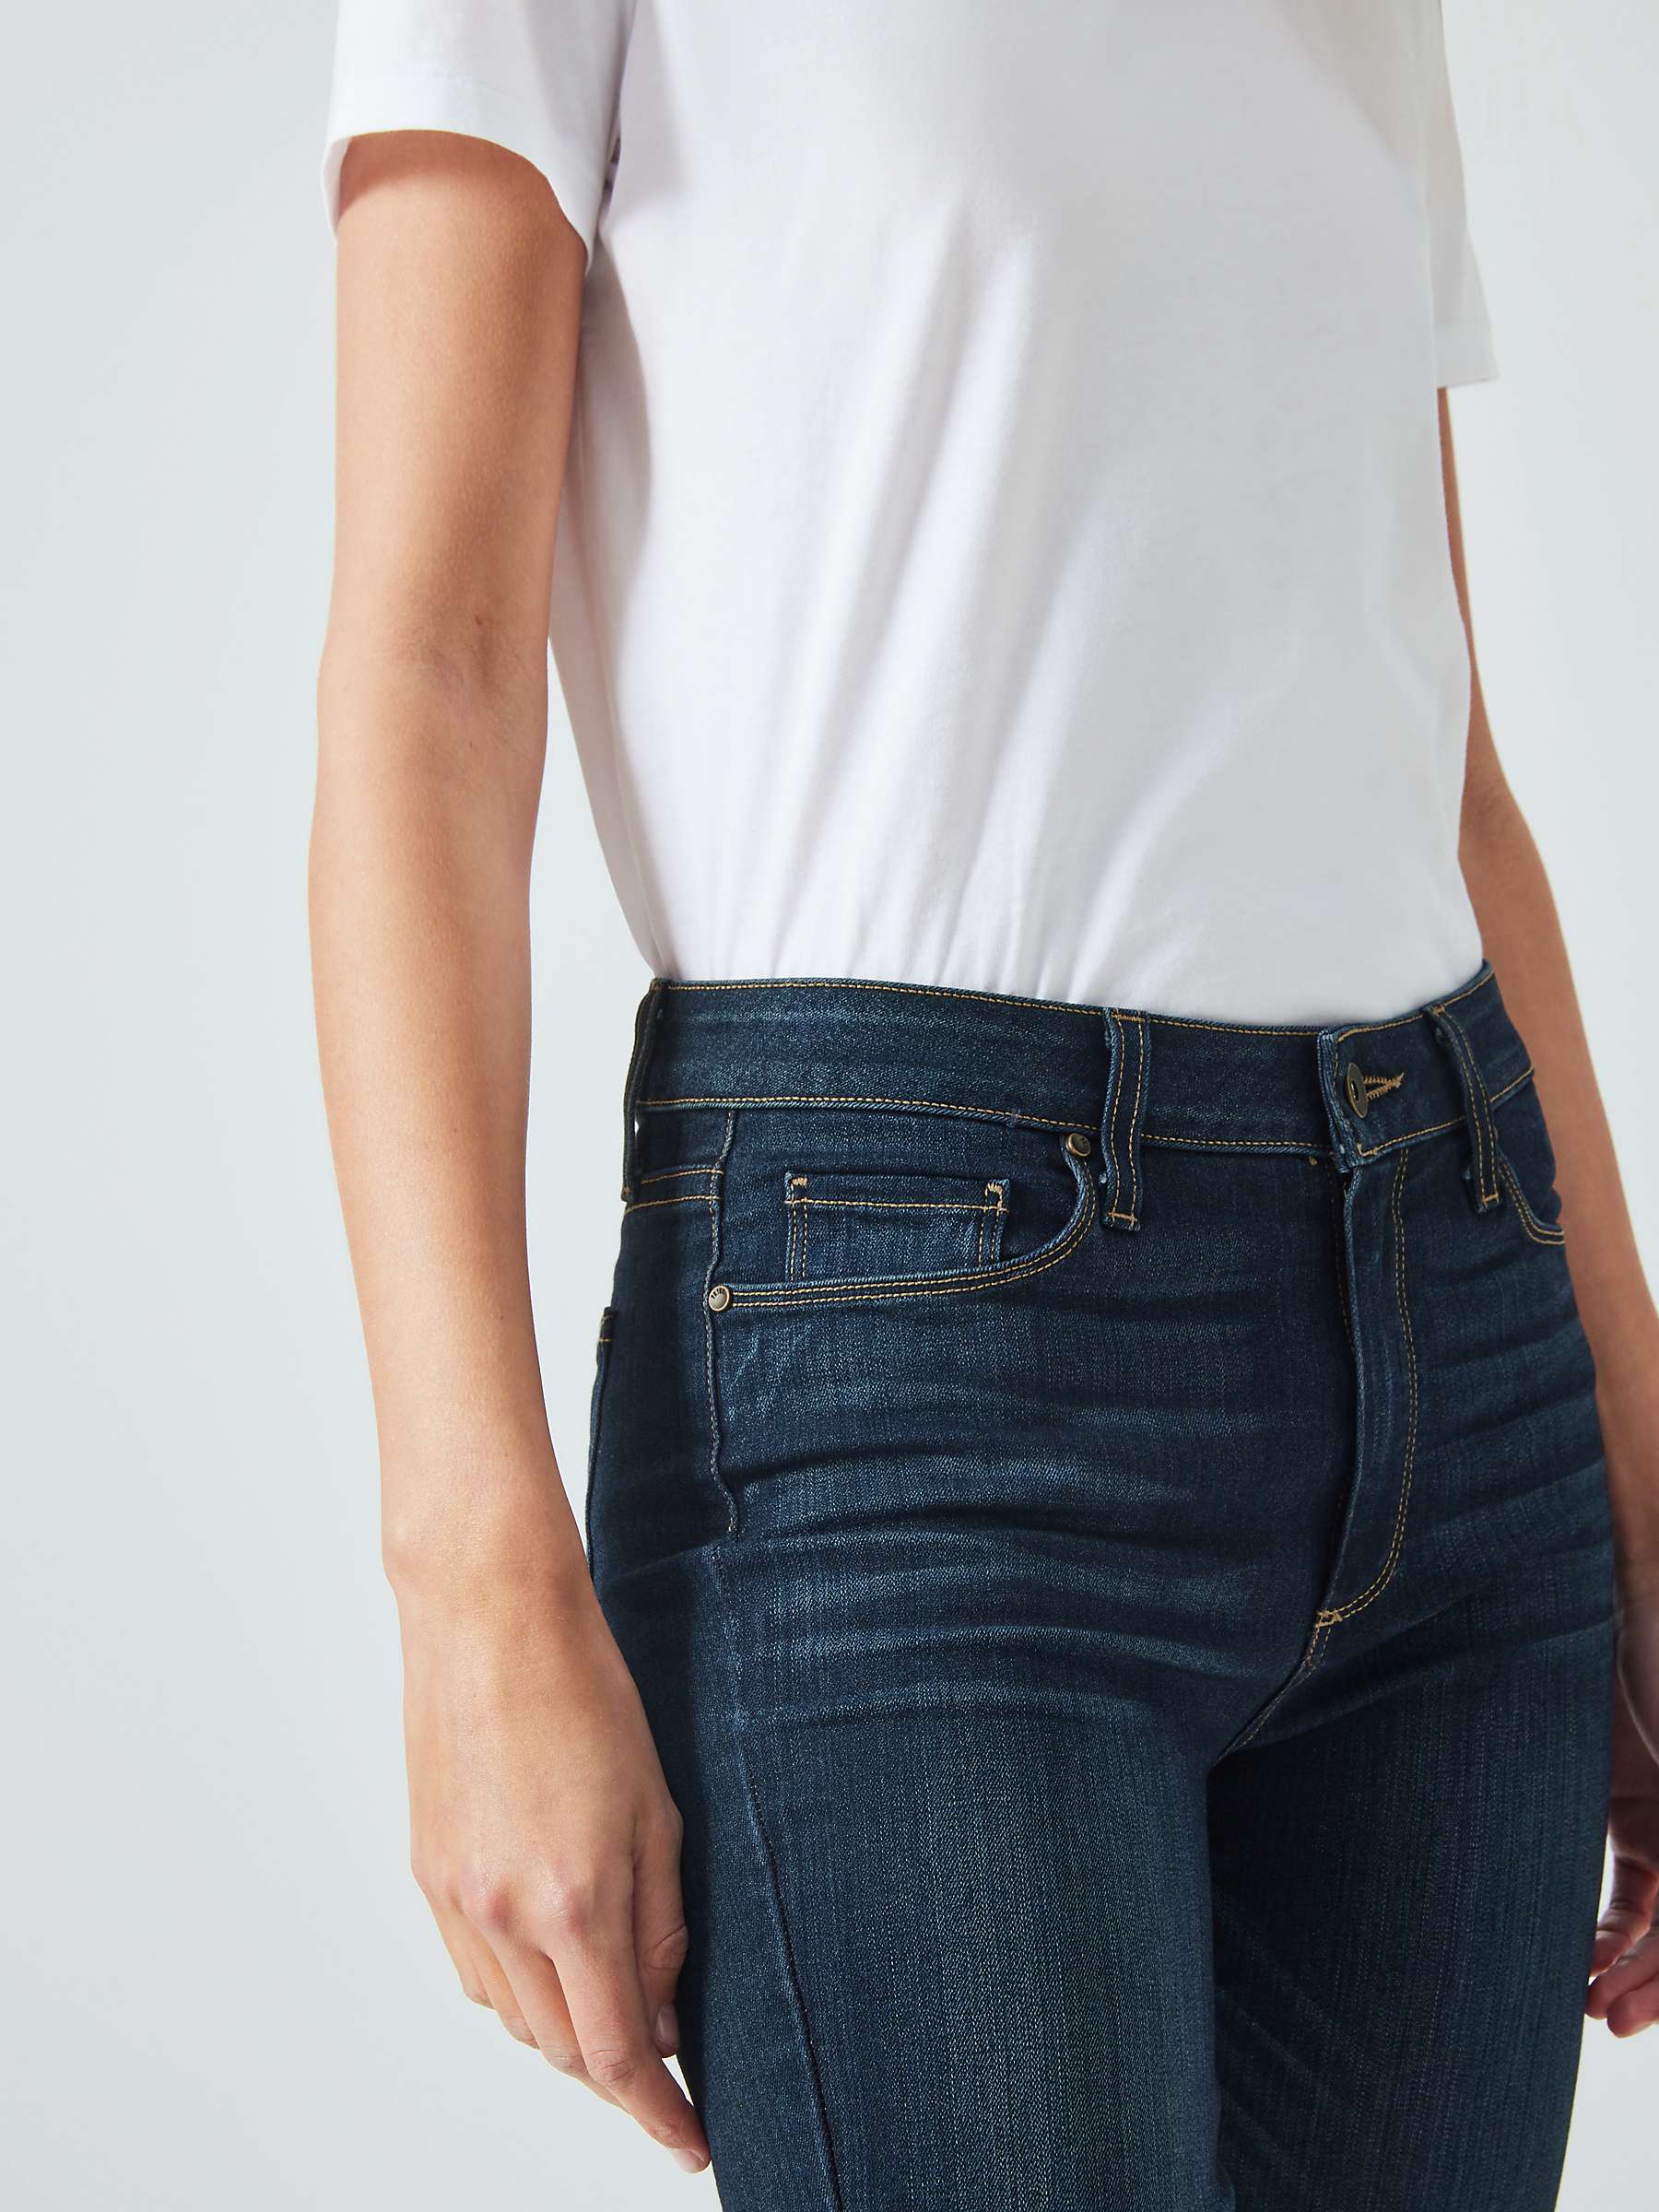 Buy PAIGE The Hoxton Skinny Ankle Jeans, Blue Online at johnlewis.com